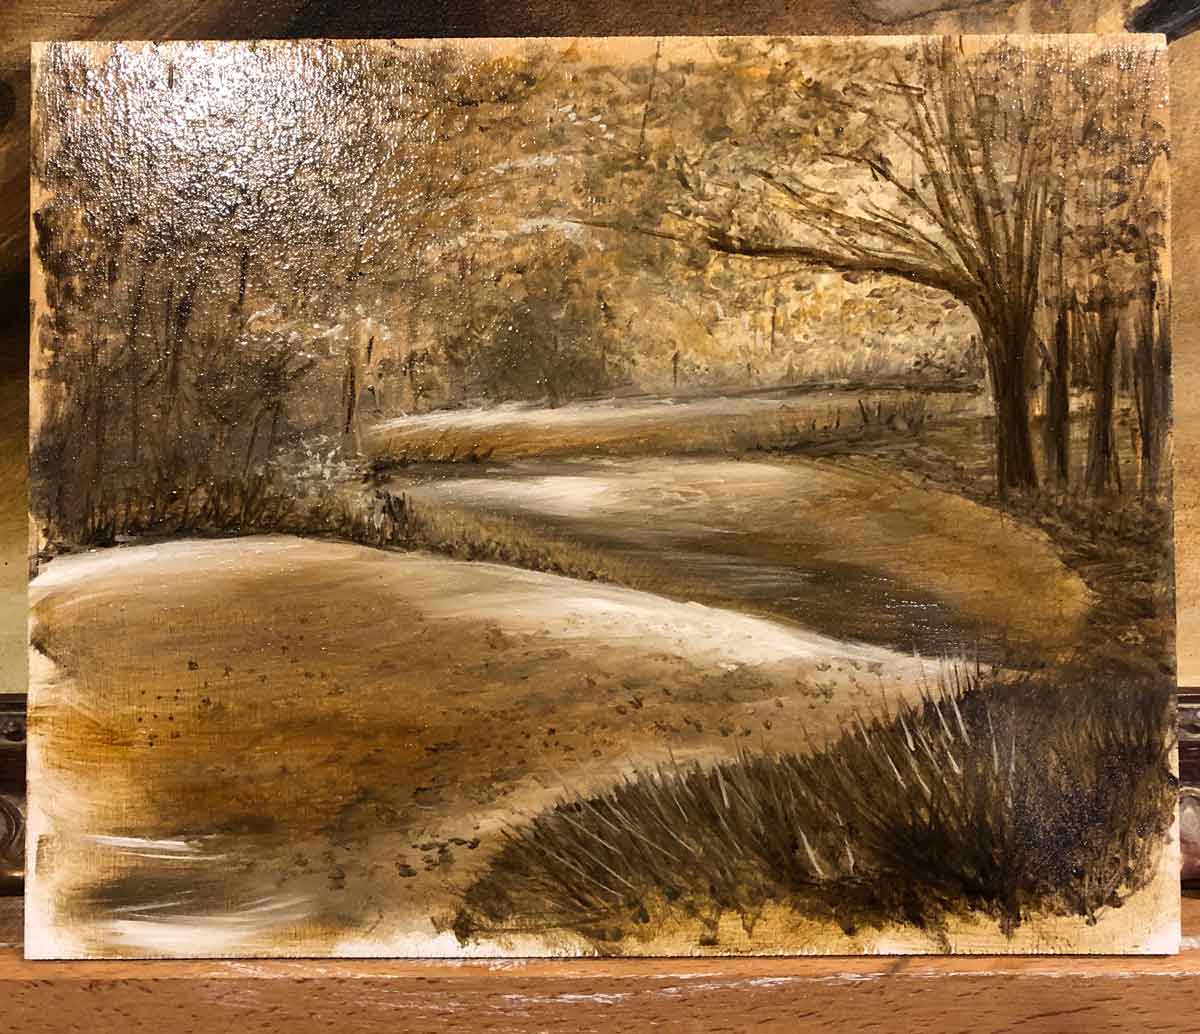 A painting in progress of the Choo Choo trail in Bentonville, AR.